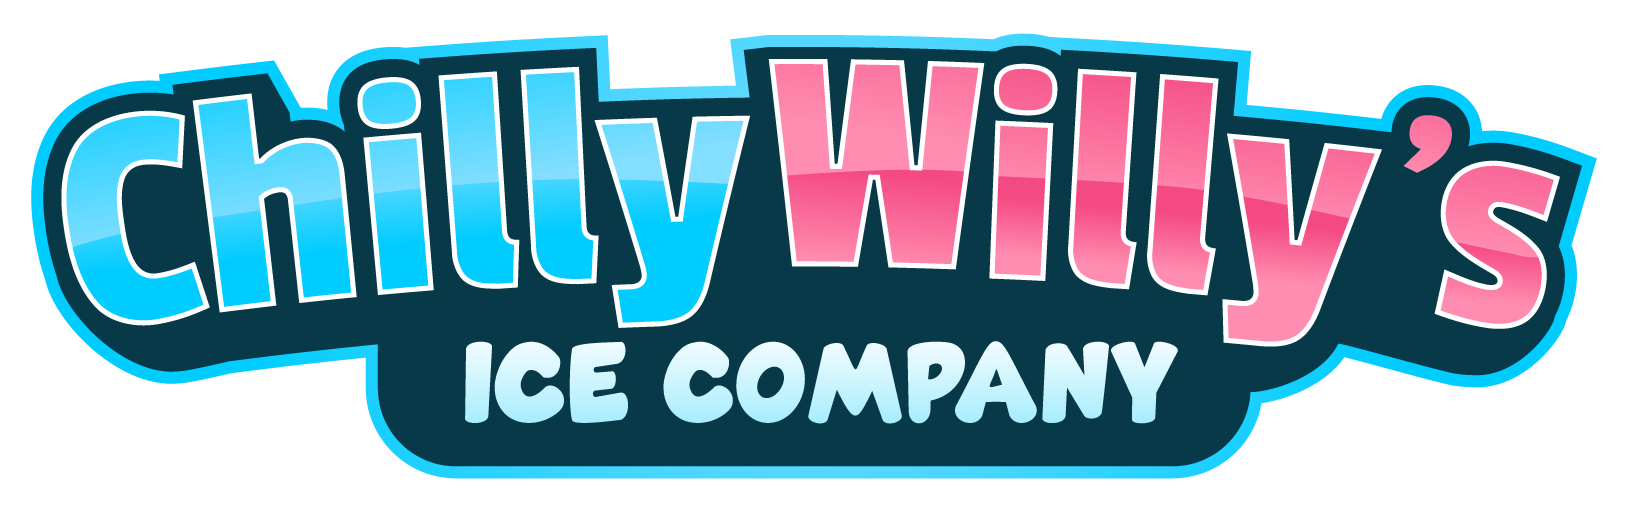 Chilly Willy's Ice Company